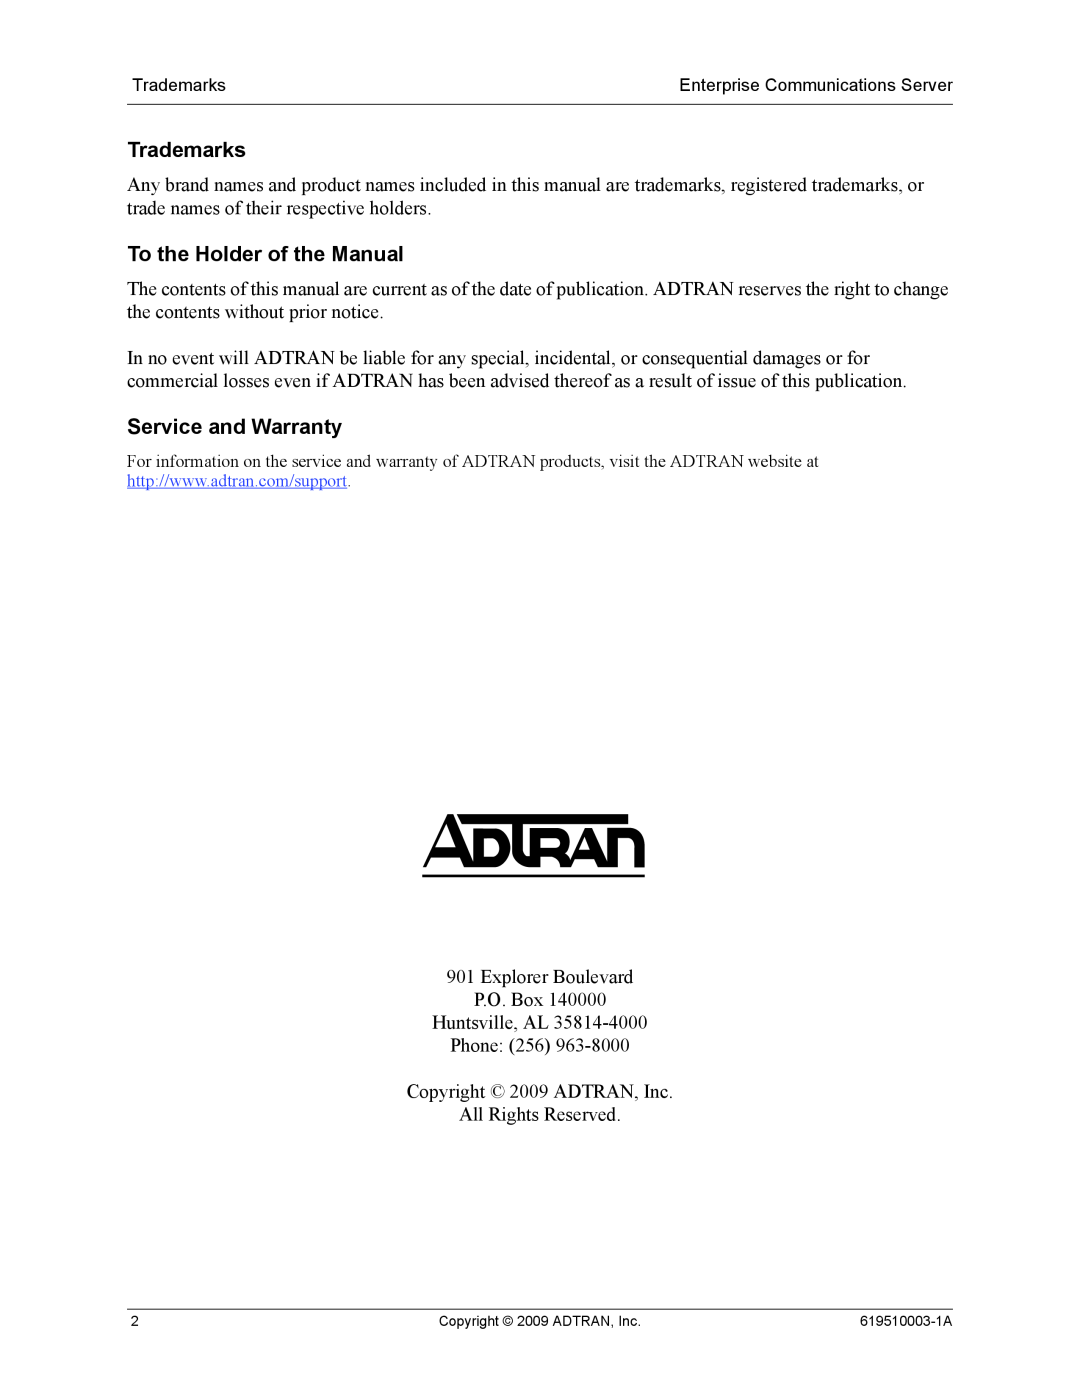 ADTRAN 619510003-1A manual Trademarks, To the Holder of the Manual, Service and Warranty 